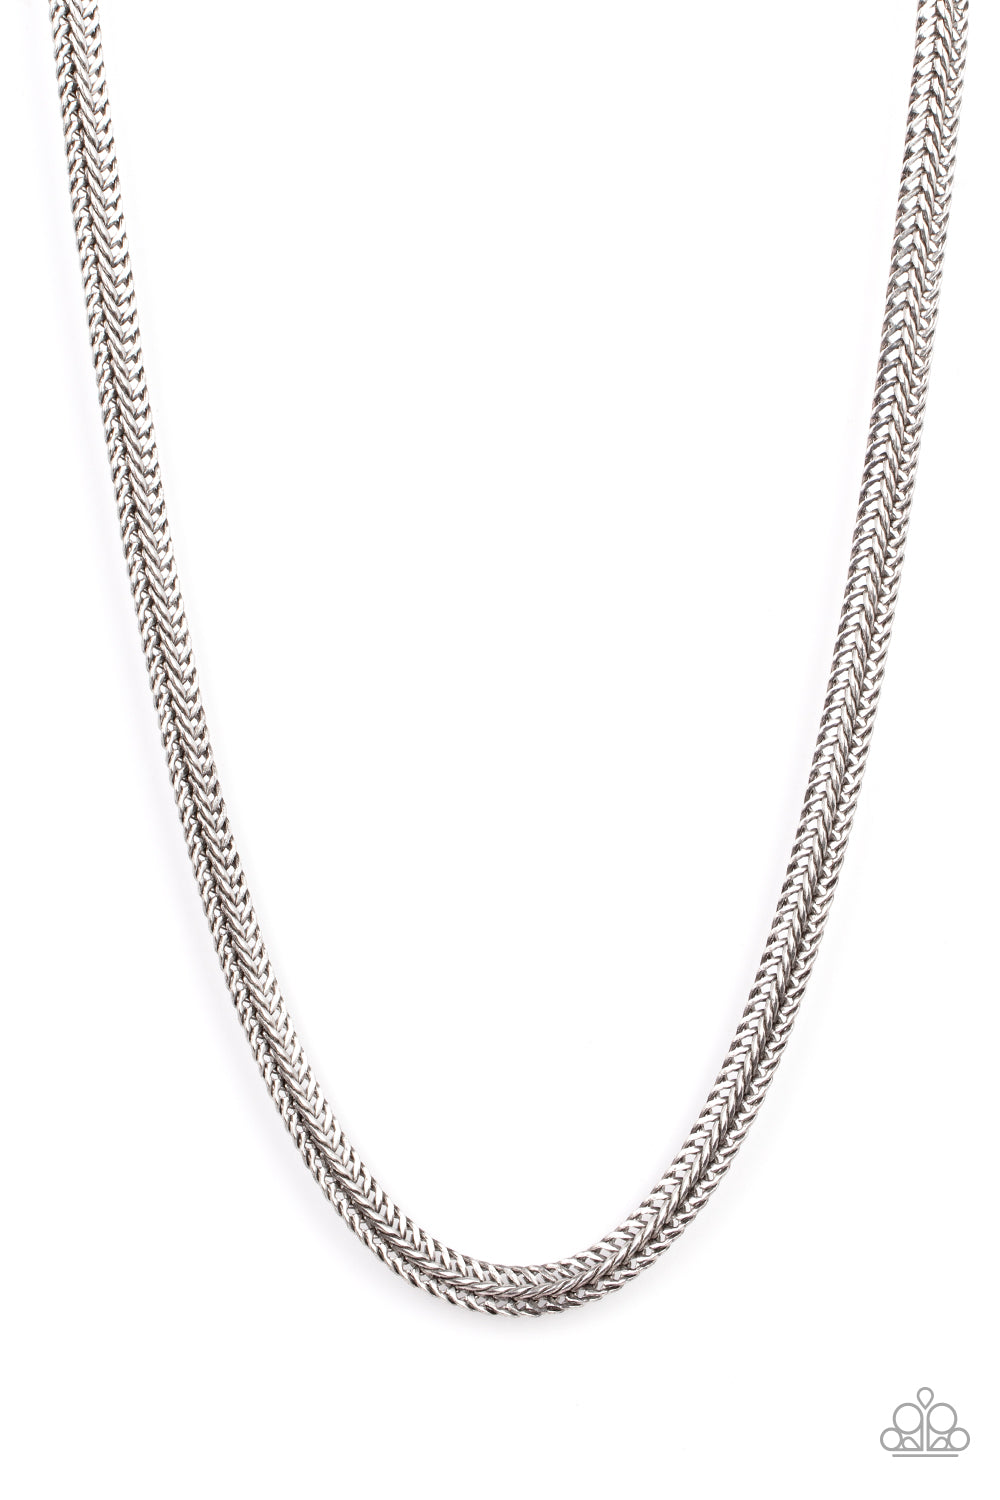 Modern Necklace Silver Bee Jewelry and Sugar Bling - Paparazzi - Urban Motorhead Accessories – Chain